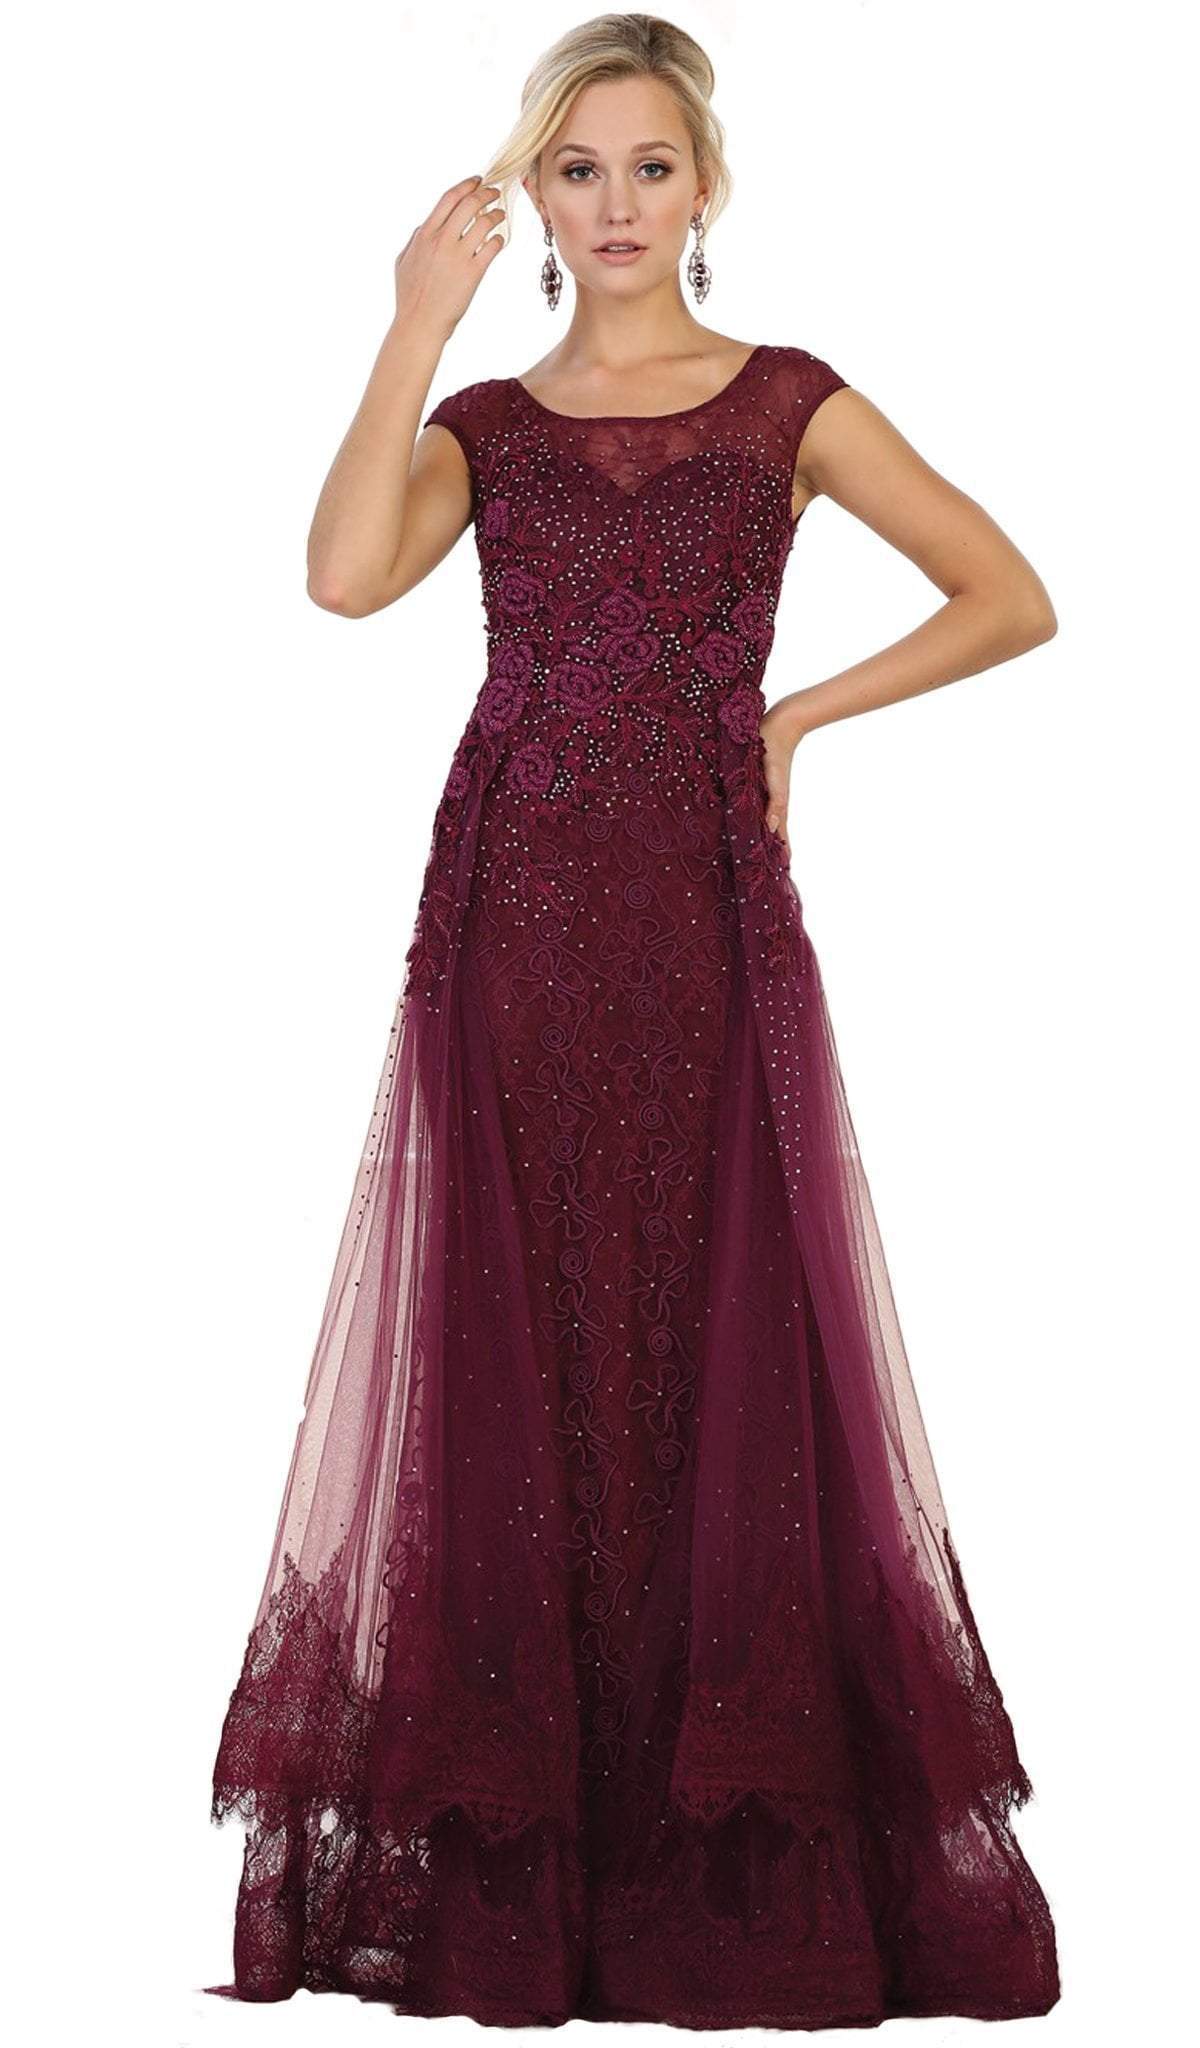 May Queen - RQ7568 Beaded Lace Illusion Bateau Sheath Mother of the Bride Dress Mother of the Bride Dresses 4 / Eggplant